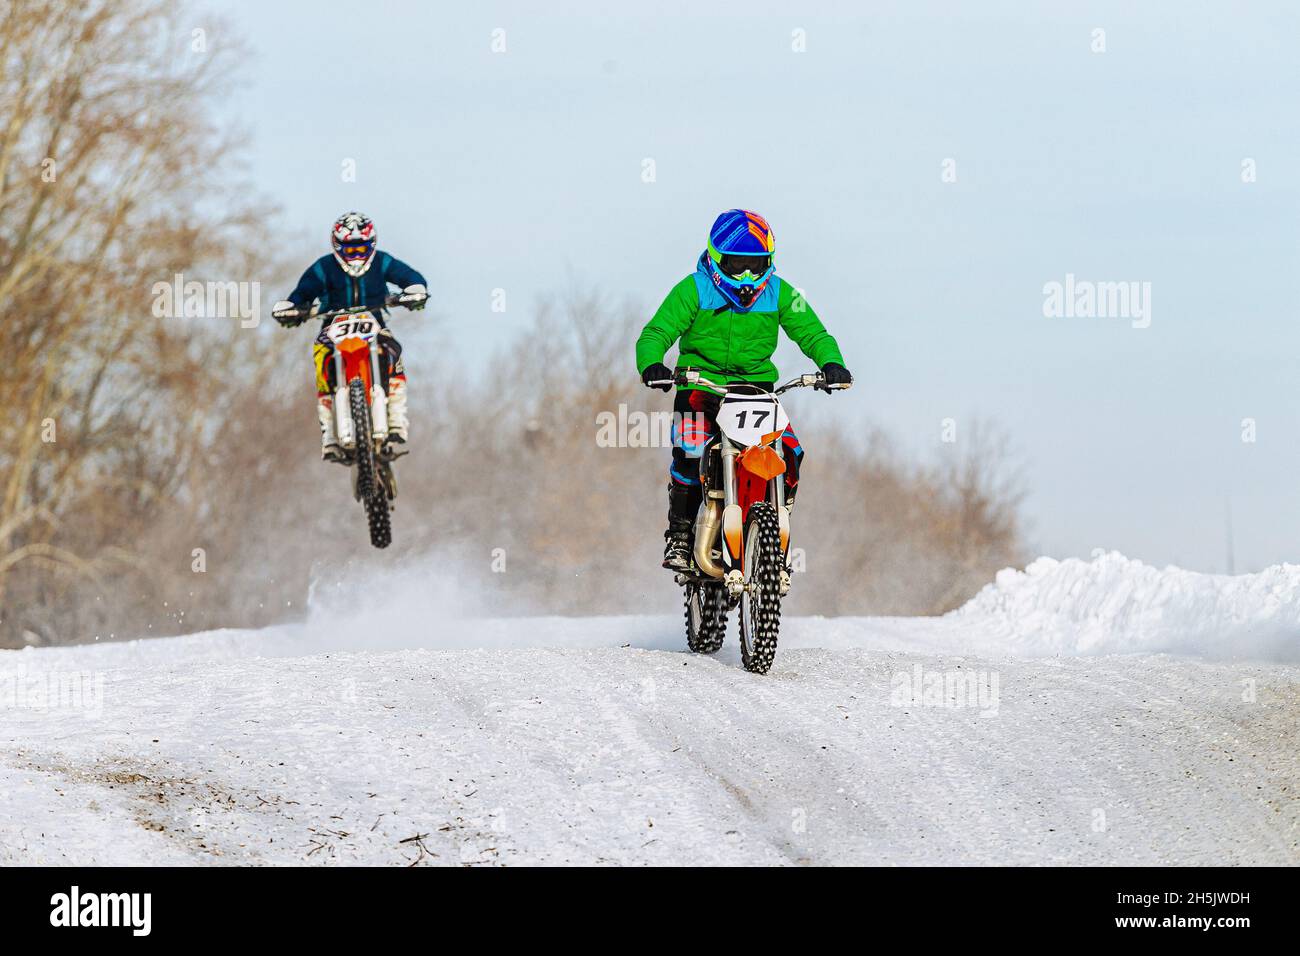 two motorcyclists riding on snowy trail winter motocross Stock Photo